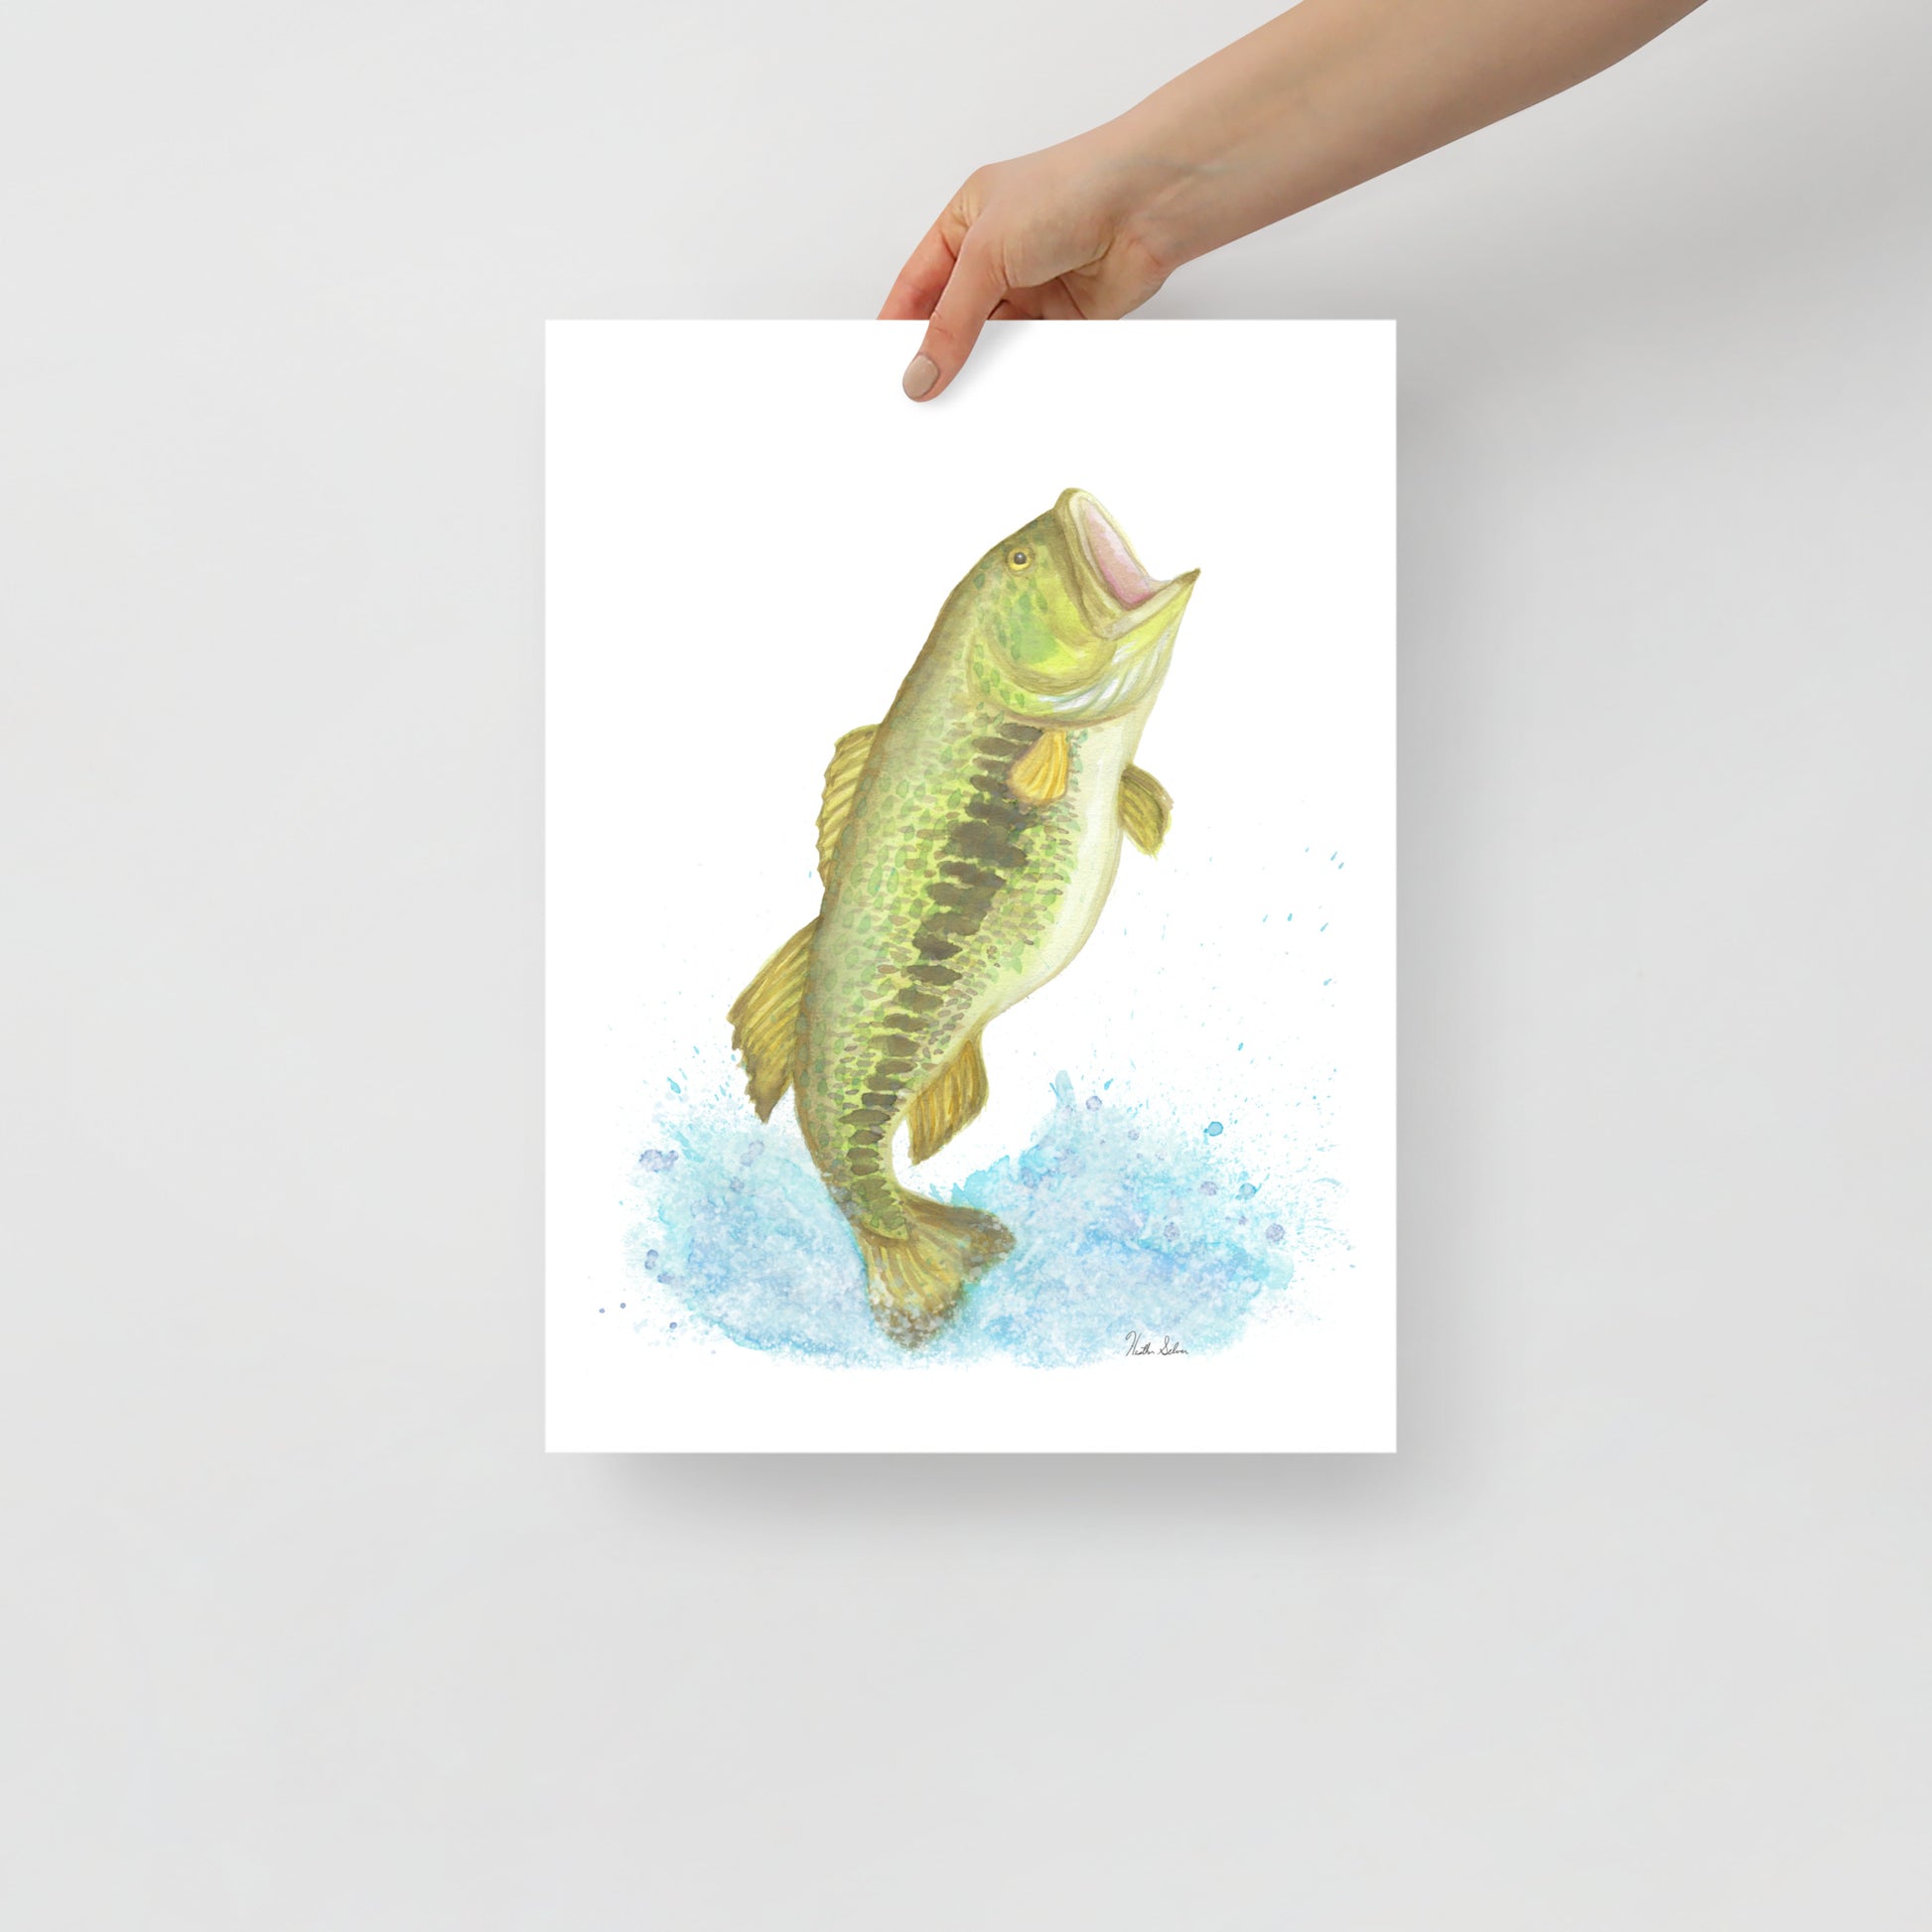 12 x 16 inch matte paper art print of an original watercolor painting of a largemouth bass leaping from the water. Shown being held by a model's hand.